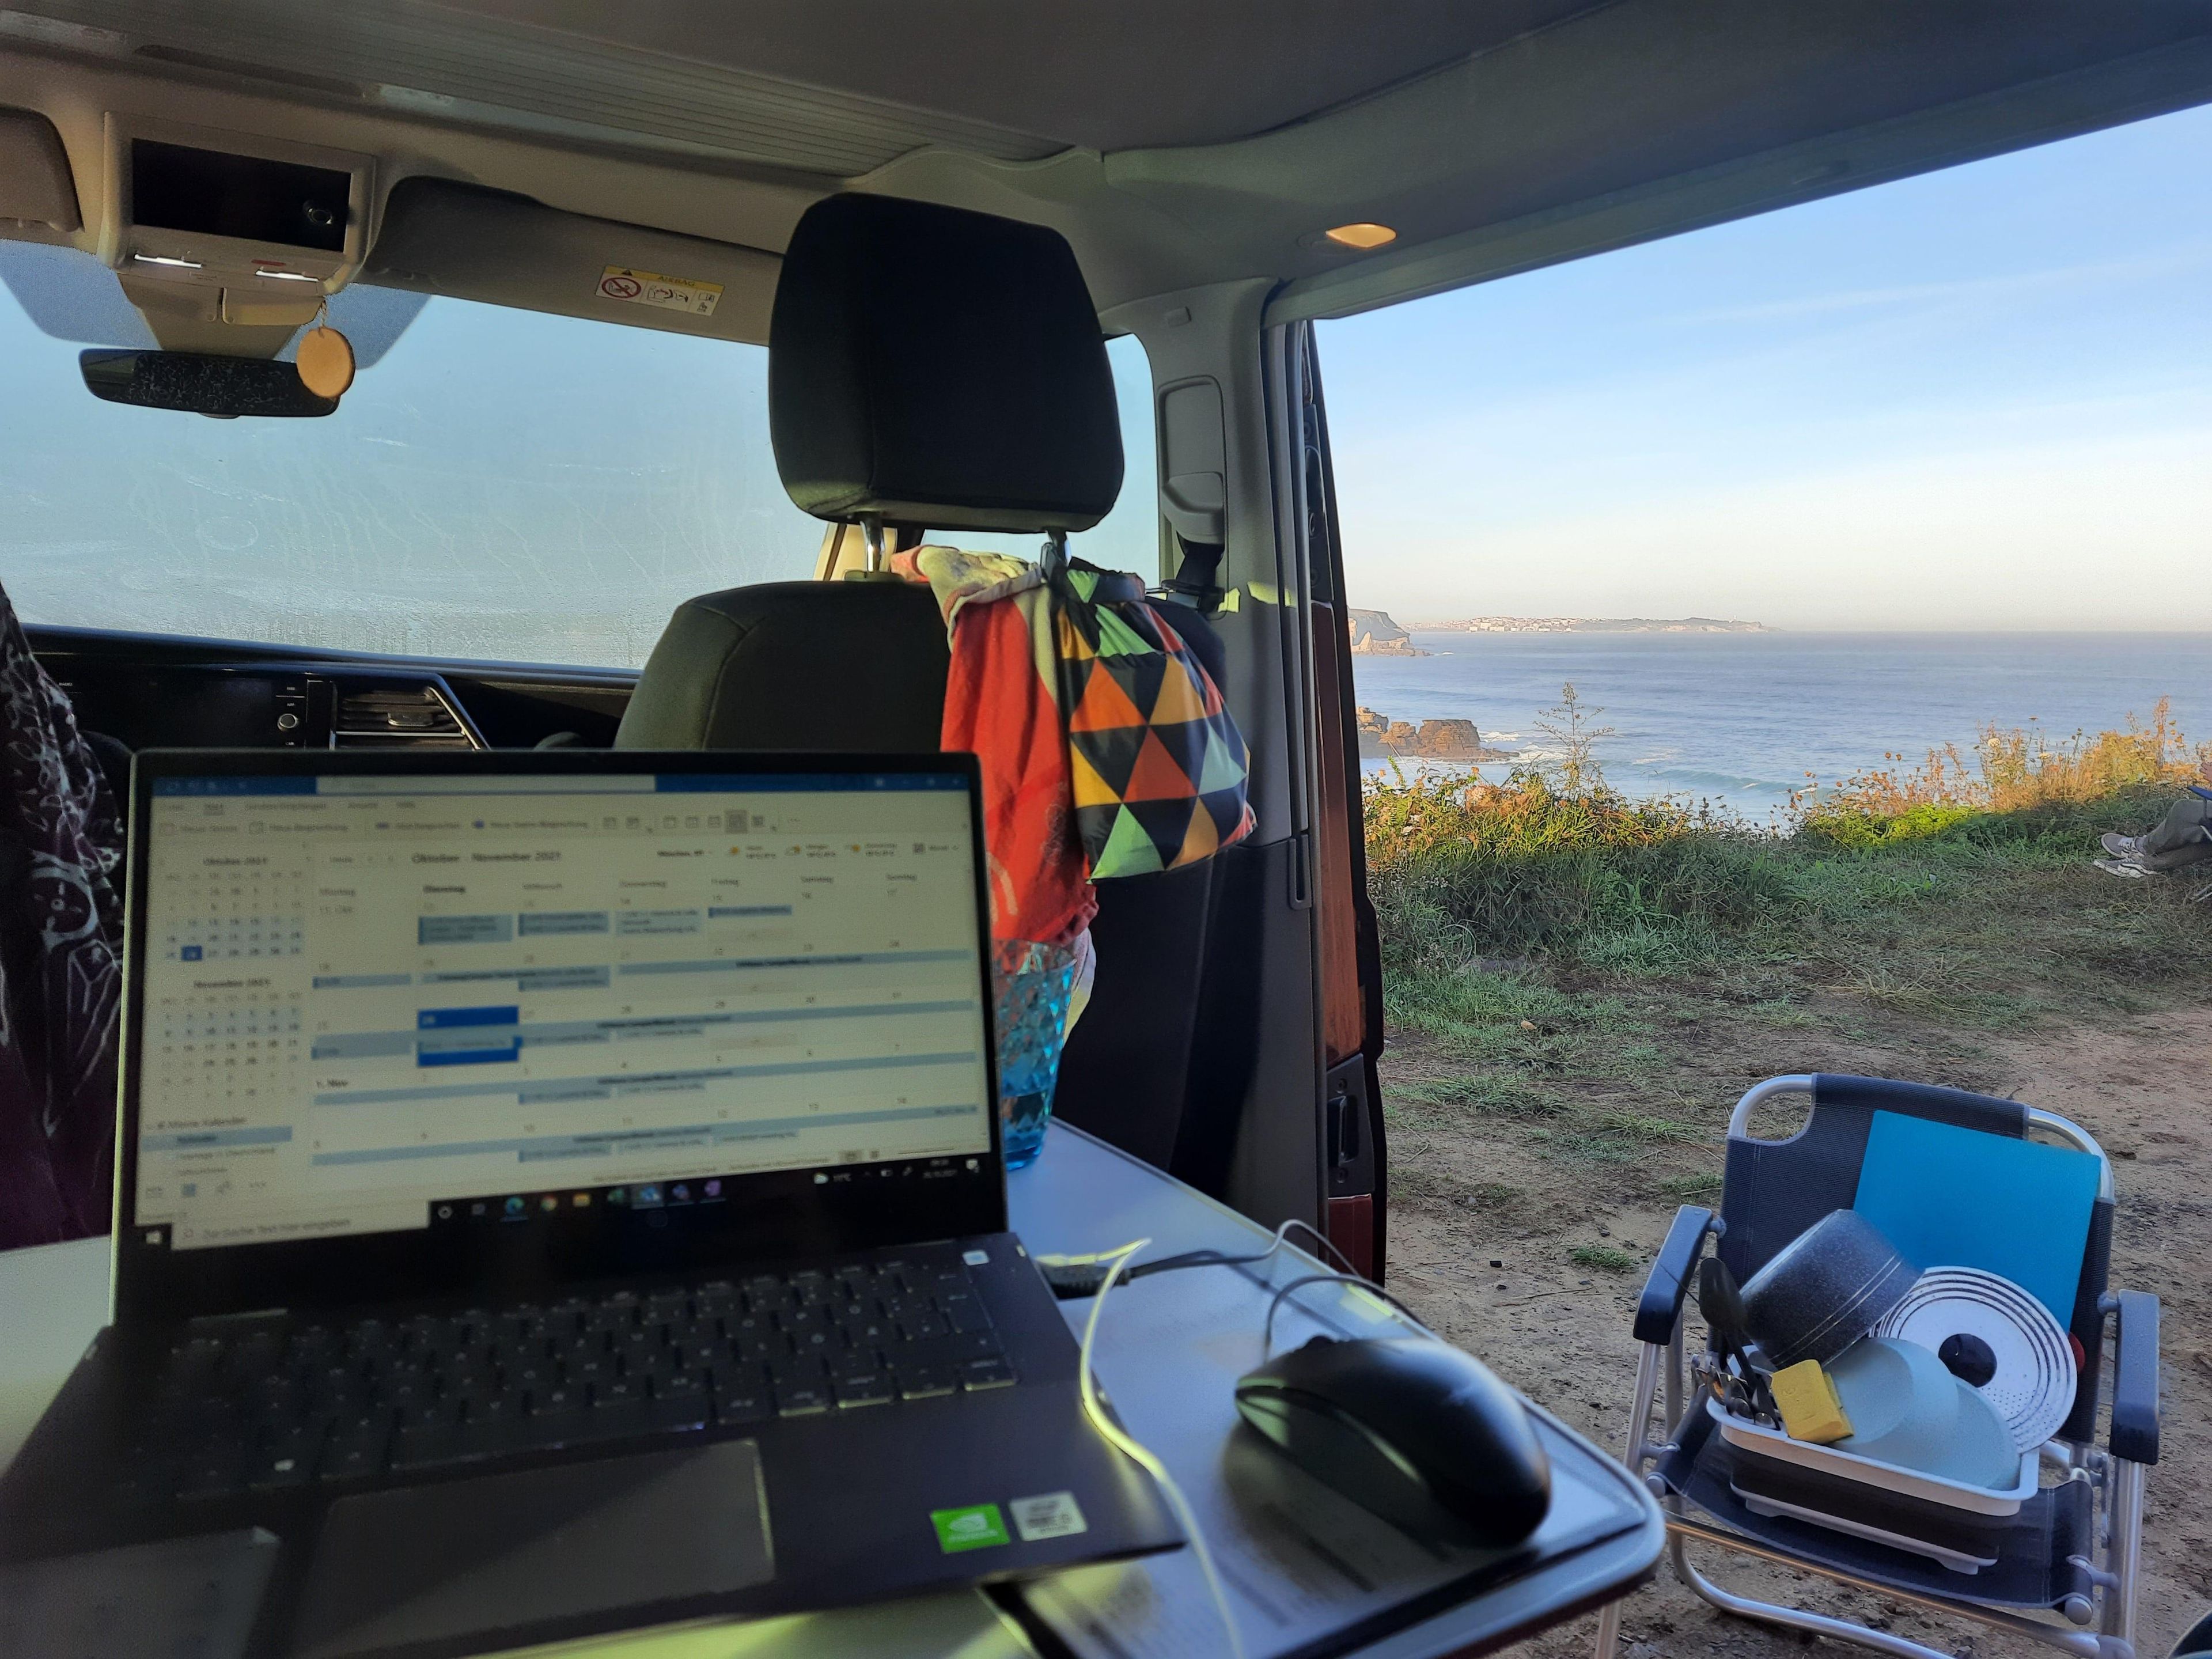 Laptop in the camper with a view of the sea and a cliff.